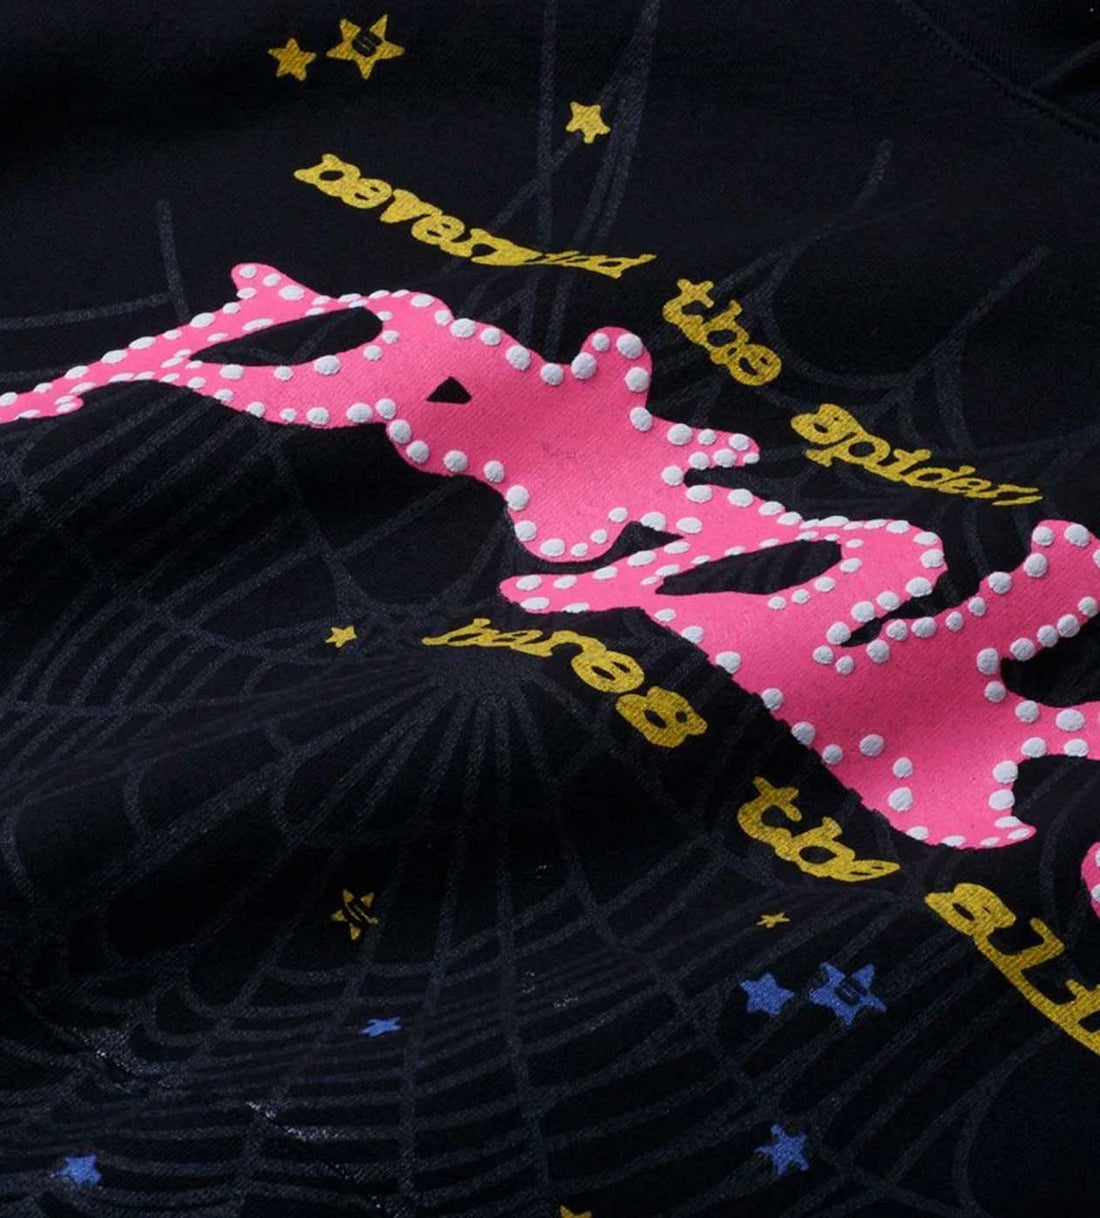 Product Image Of Sp5der P*nk Hoodie Black Front Close Up View